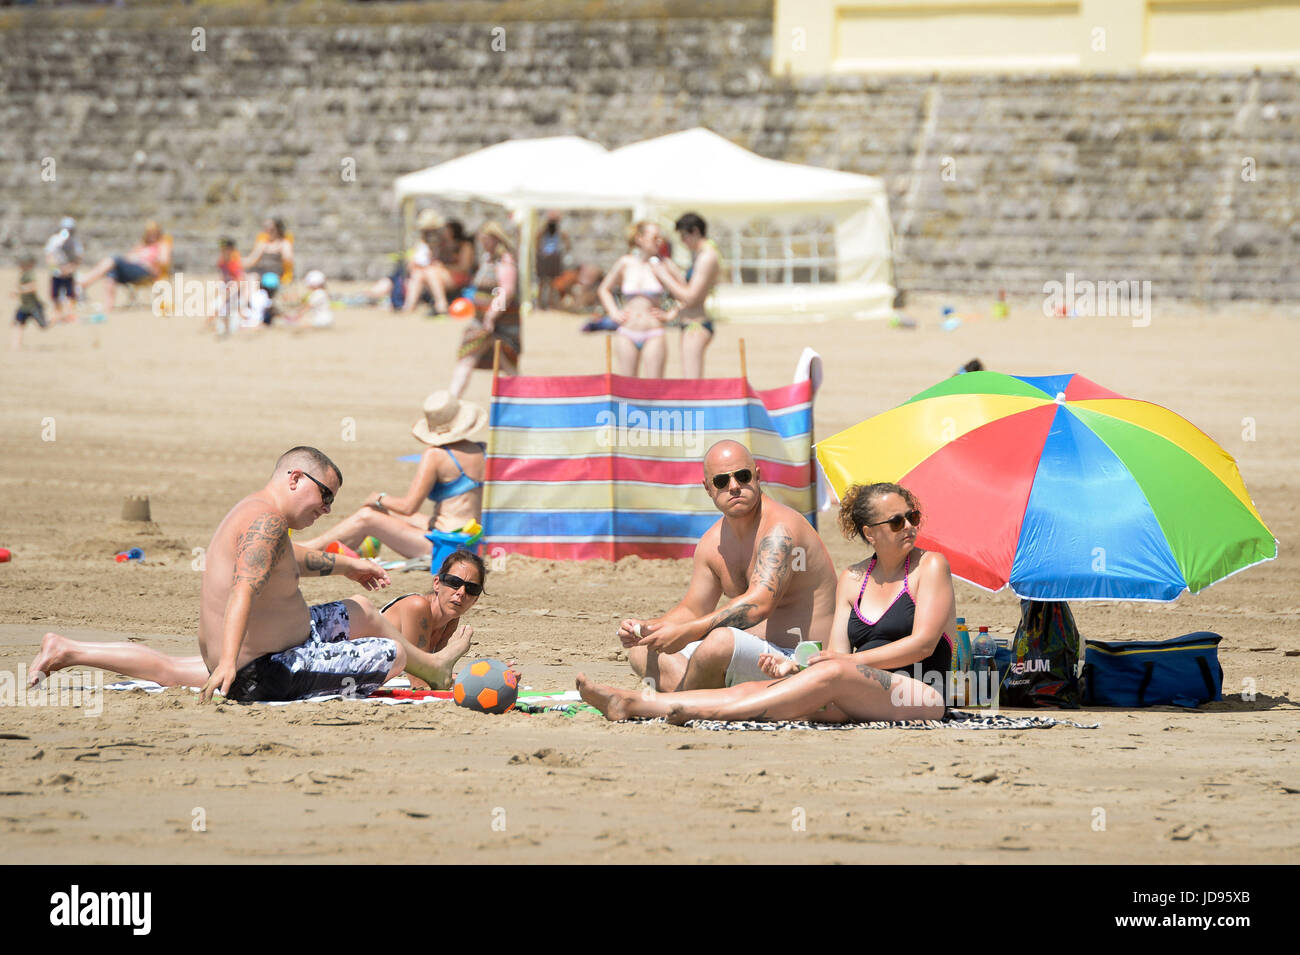 Sunbathers on the beach at Barry Island, South Wales, where temperatures are in the high twenties and people flock to the seaside to enjoy the glorious sunny weather. Stock Photo